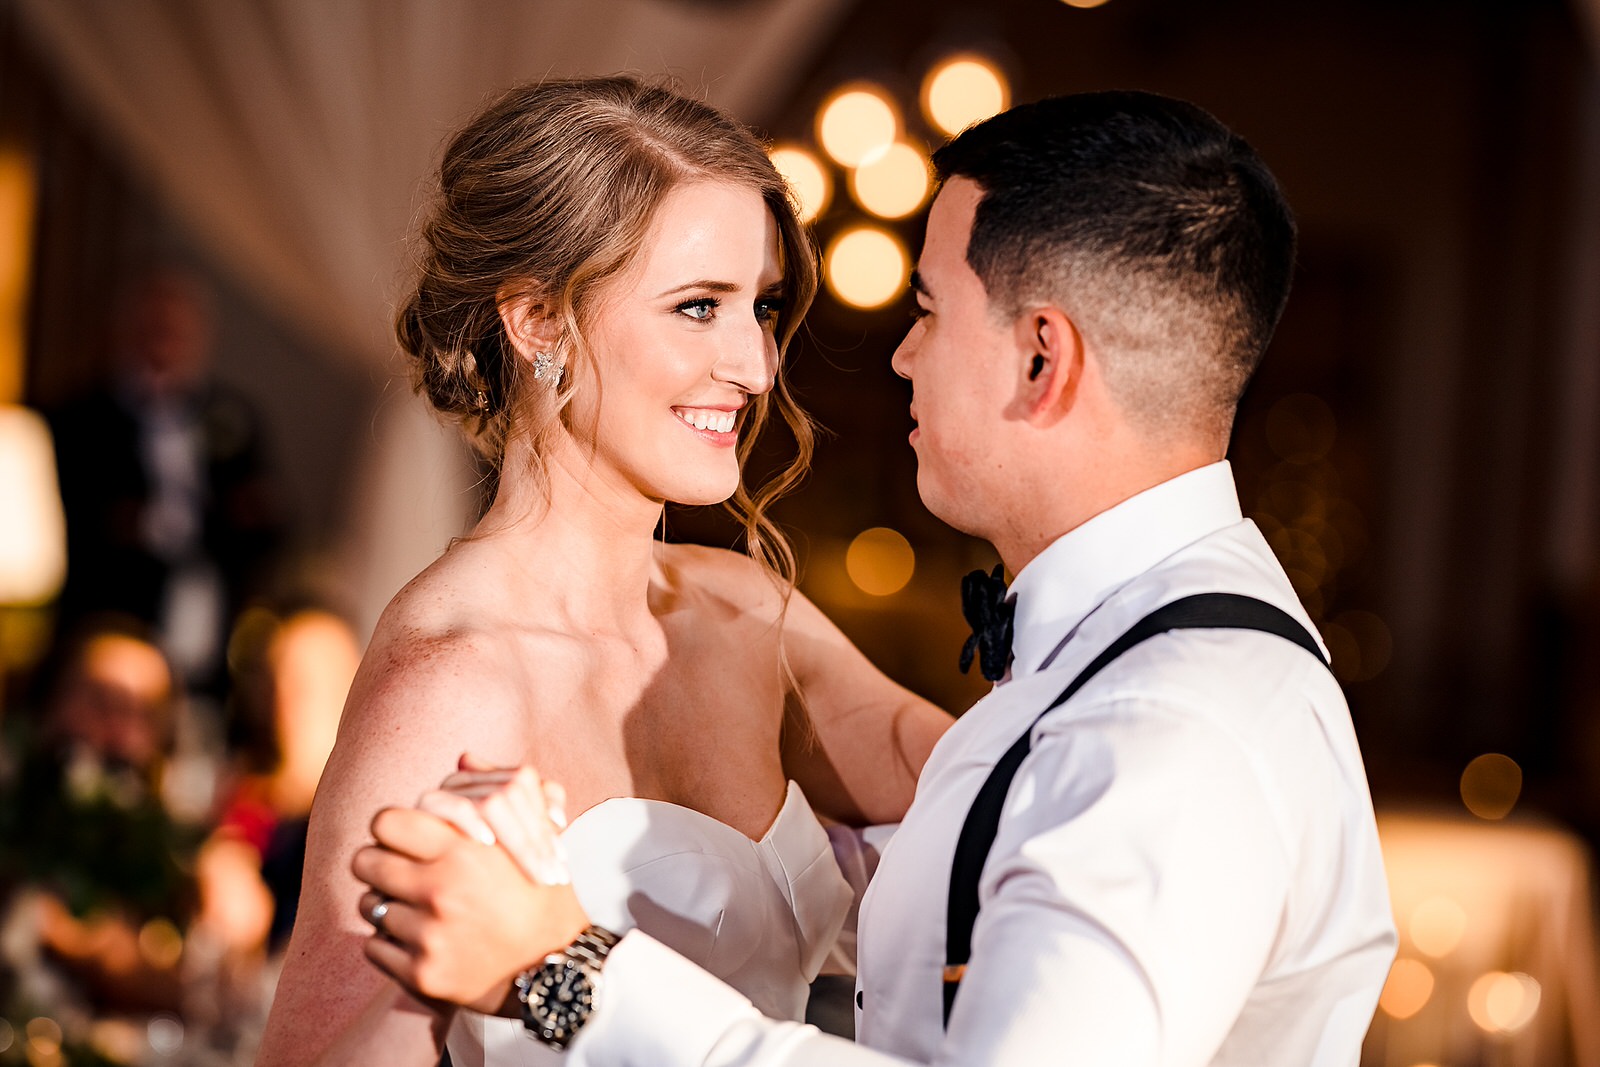 Couple shares their first dance at The Cotton Room in Durham, NC